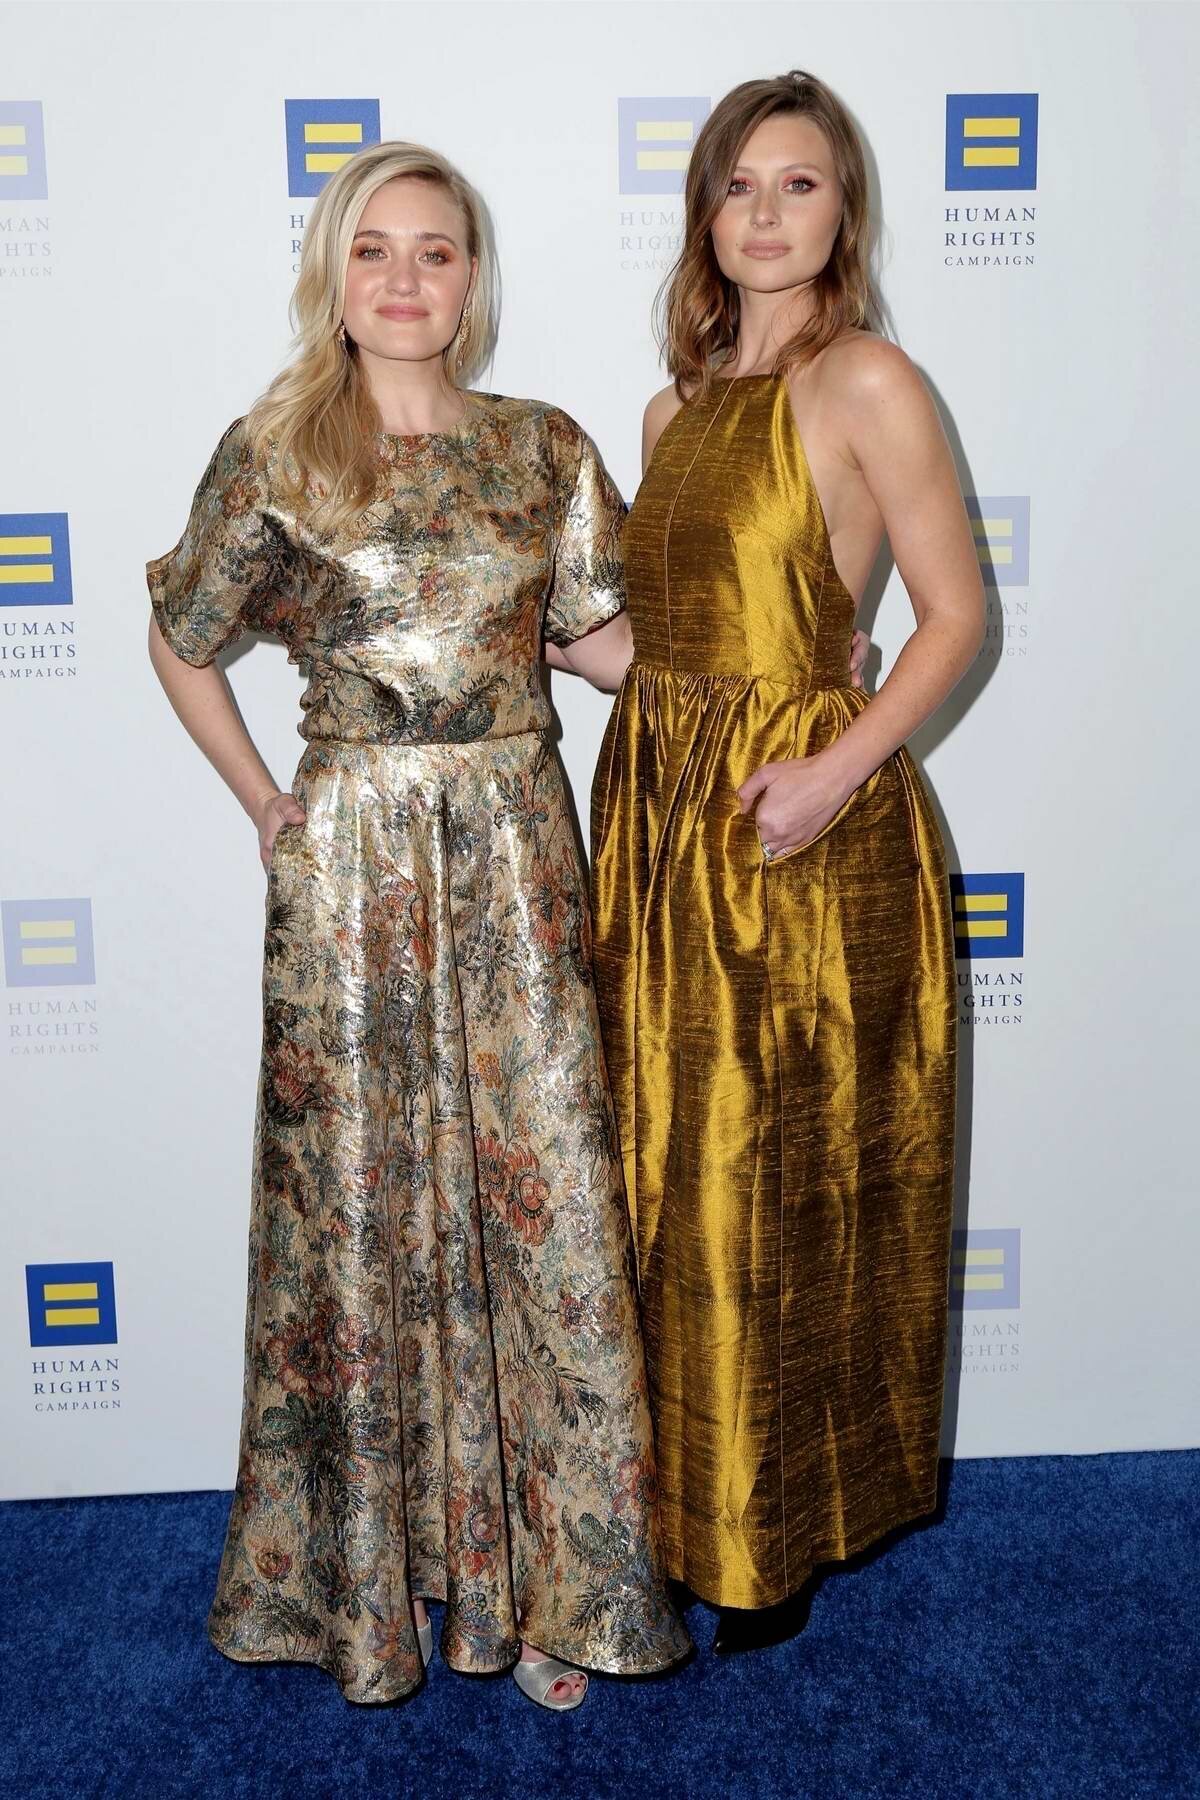 Aly and Aj Michalka posing together at the Human Rights Campaign event in full length dresses